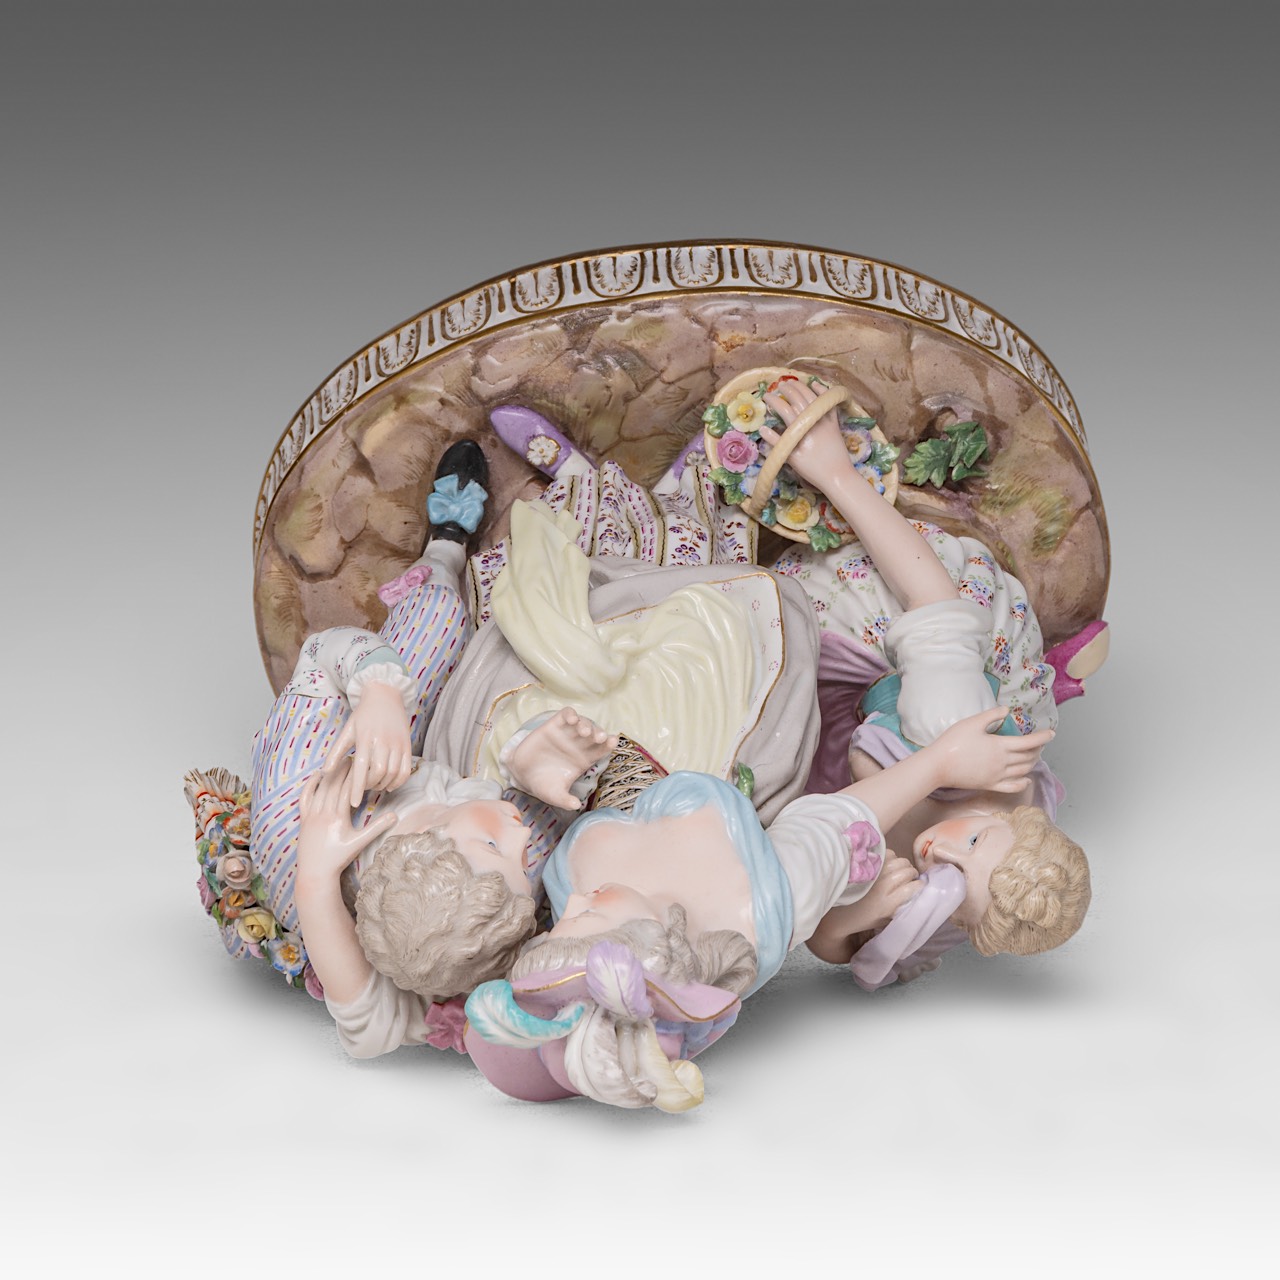 A polychrome Meissen porcelain group with a gallant scene, H 32 cm - Image 7 of 9